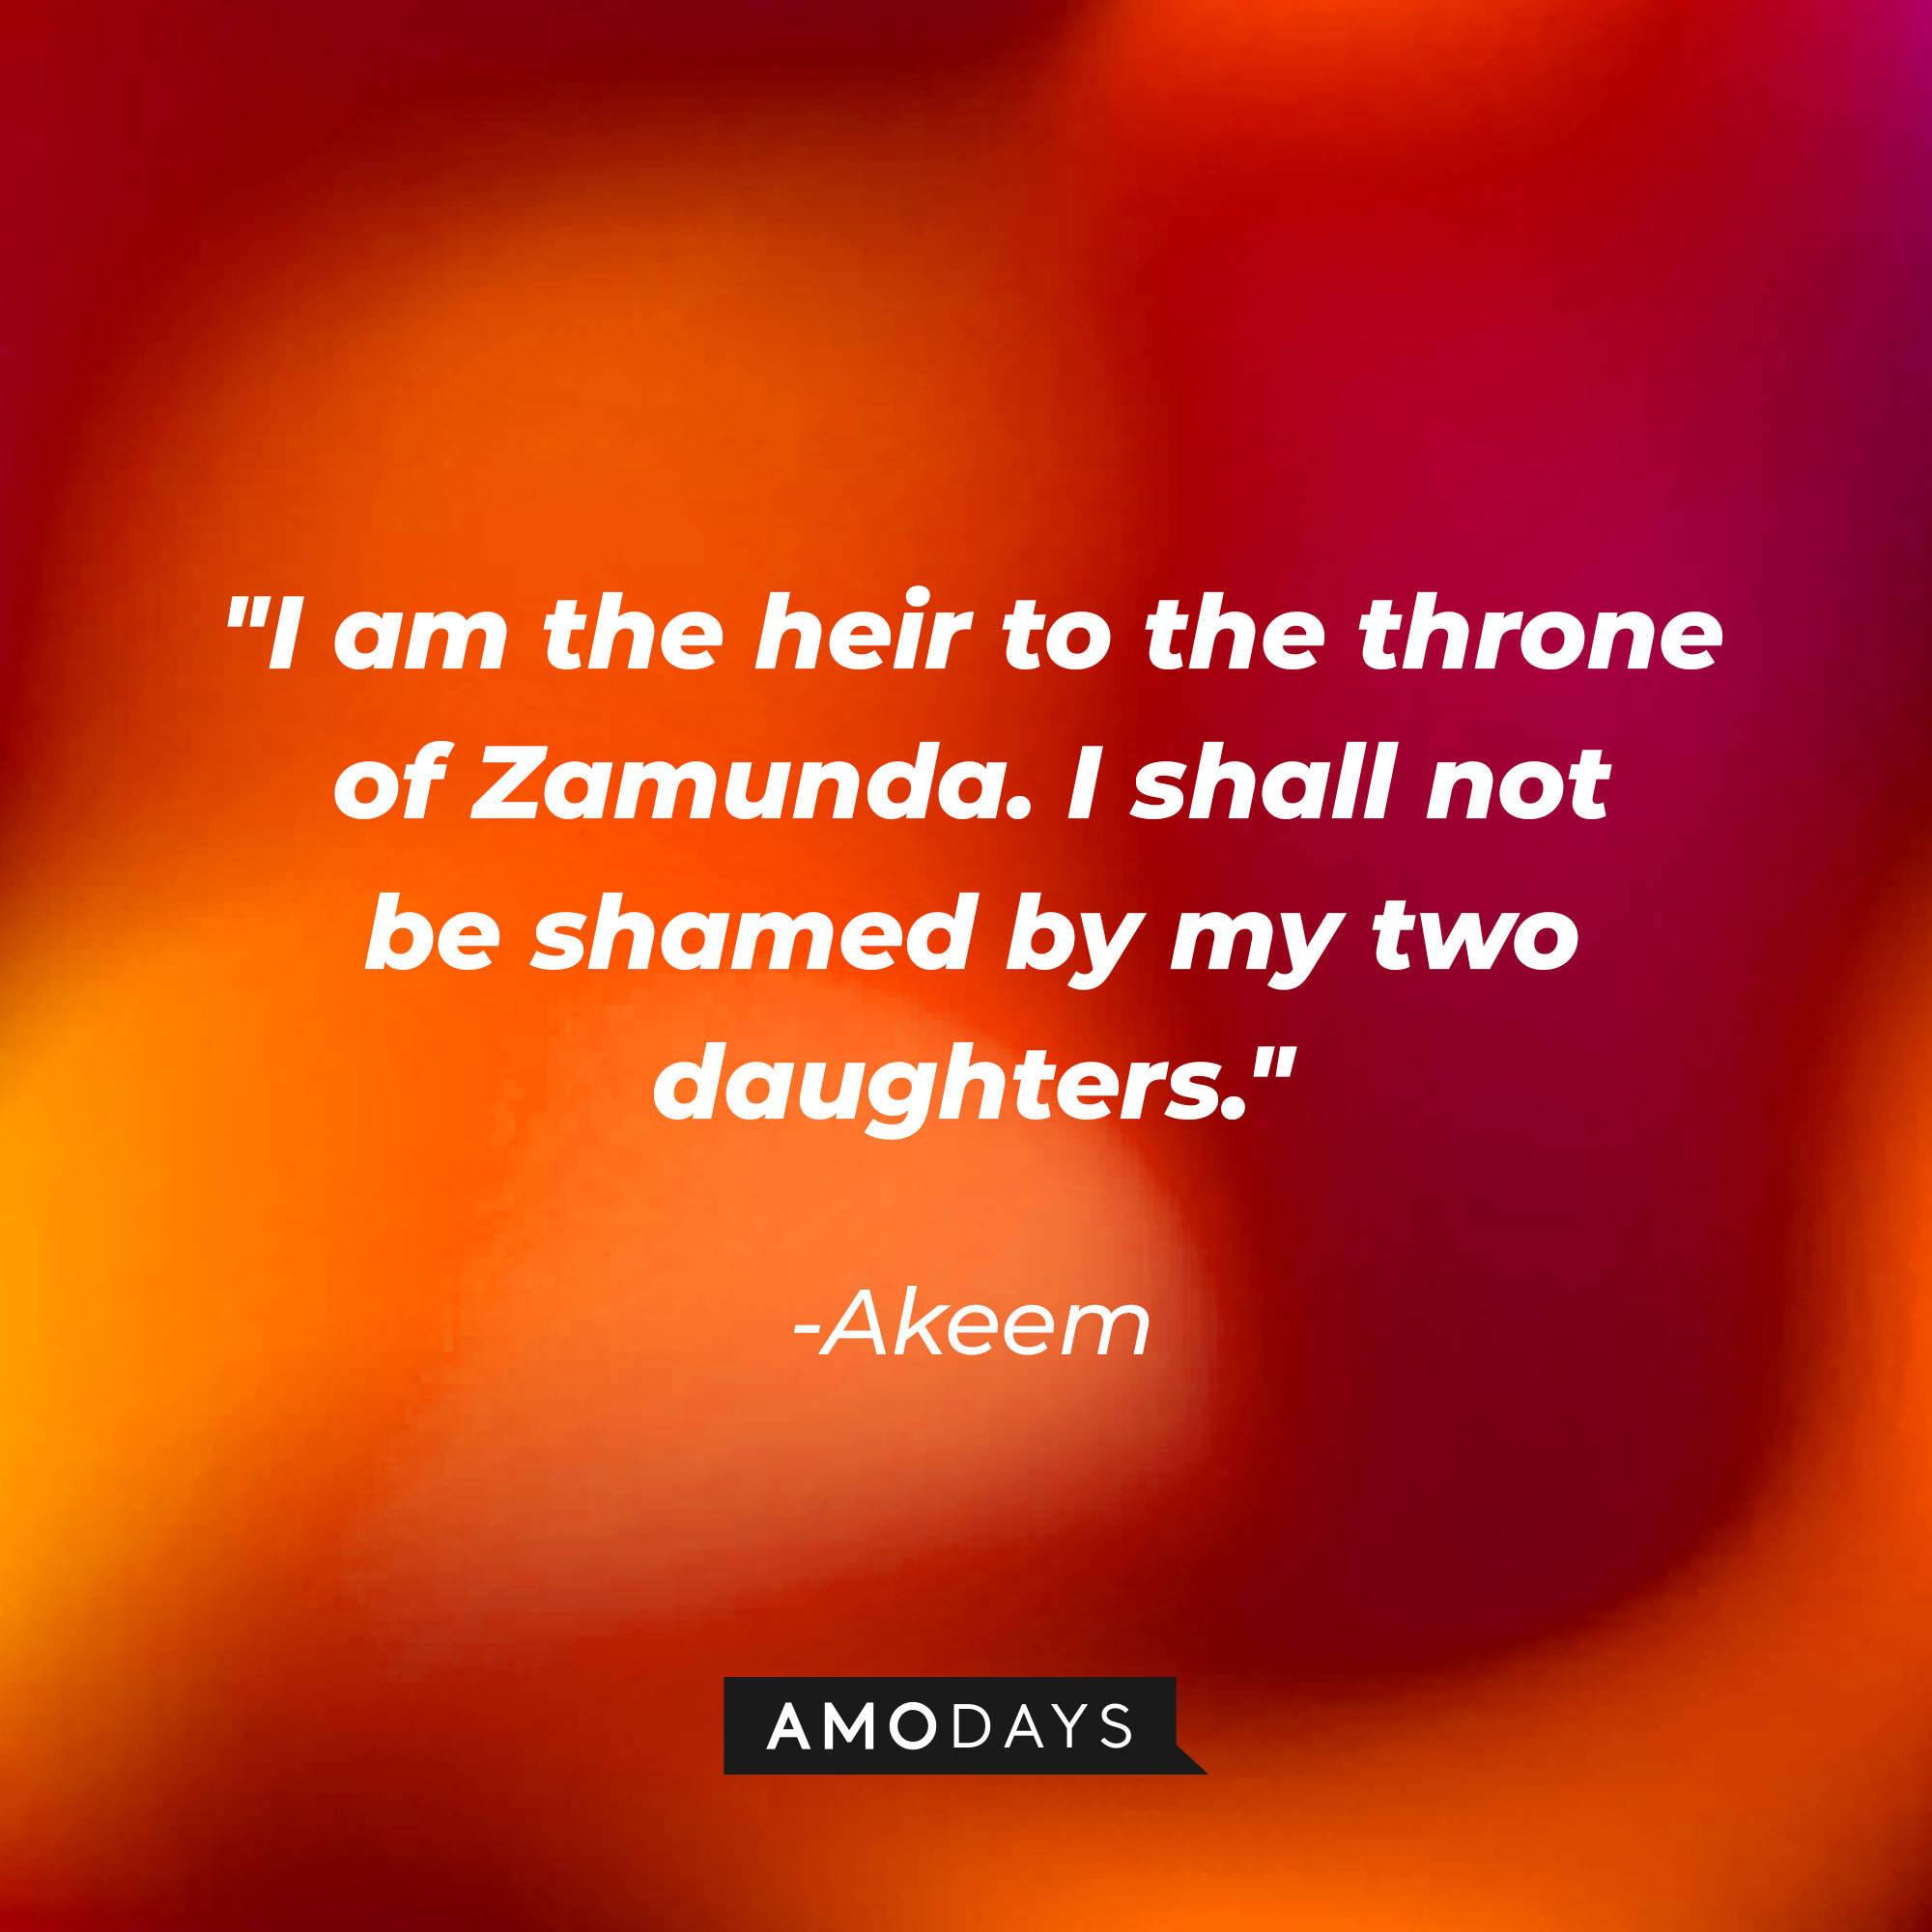 Akeem’s quote: "I am the heir to the throne of Zamunda. I shall not be shamed by my two daughters." | Source: AmoDays